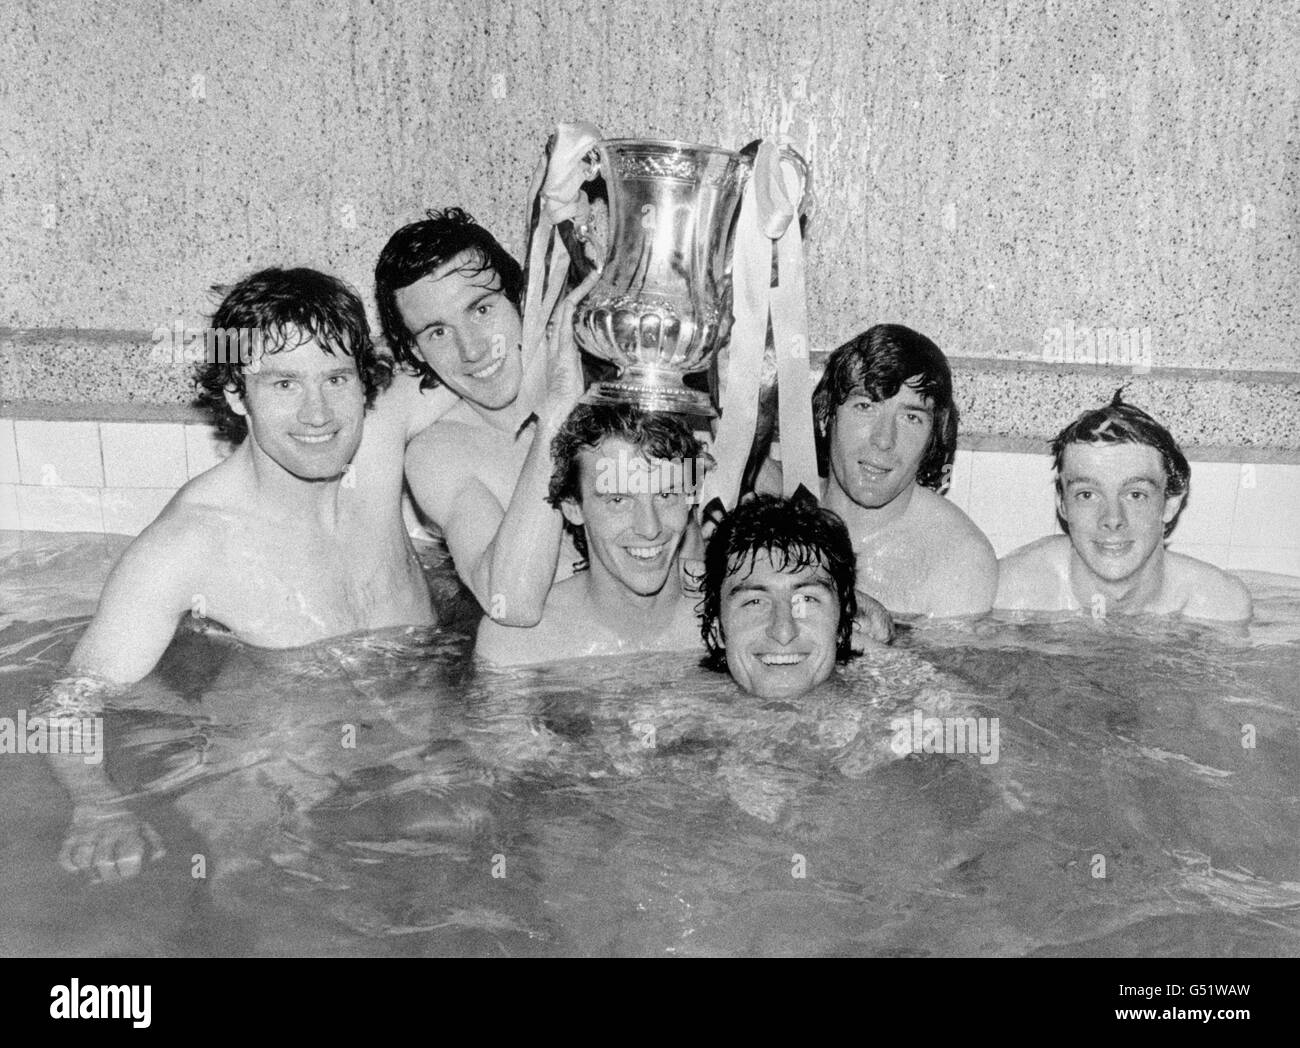 Splashing out after their 3-2 win over Manchester United in this afternoon's FA Cup Final at Wembley. Arsenal players (from left): Pat Rice (captain), Frank Stapleton, Graham Rix, Brian Talbot, Pat Jennings and David O'Leary take a well-earned bath, making sure to keep their victors' trophy high and dry Stock Photo